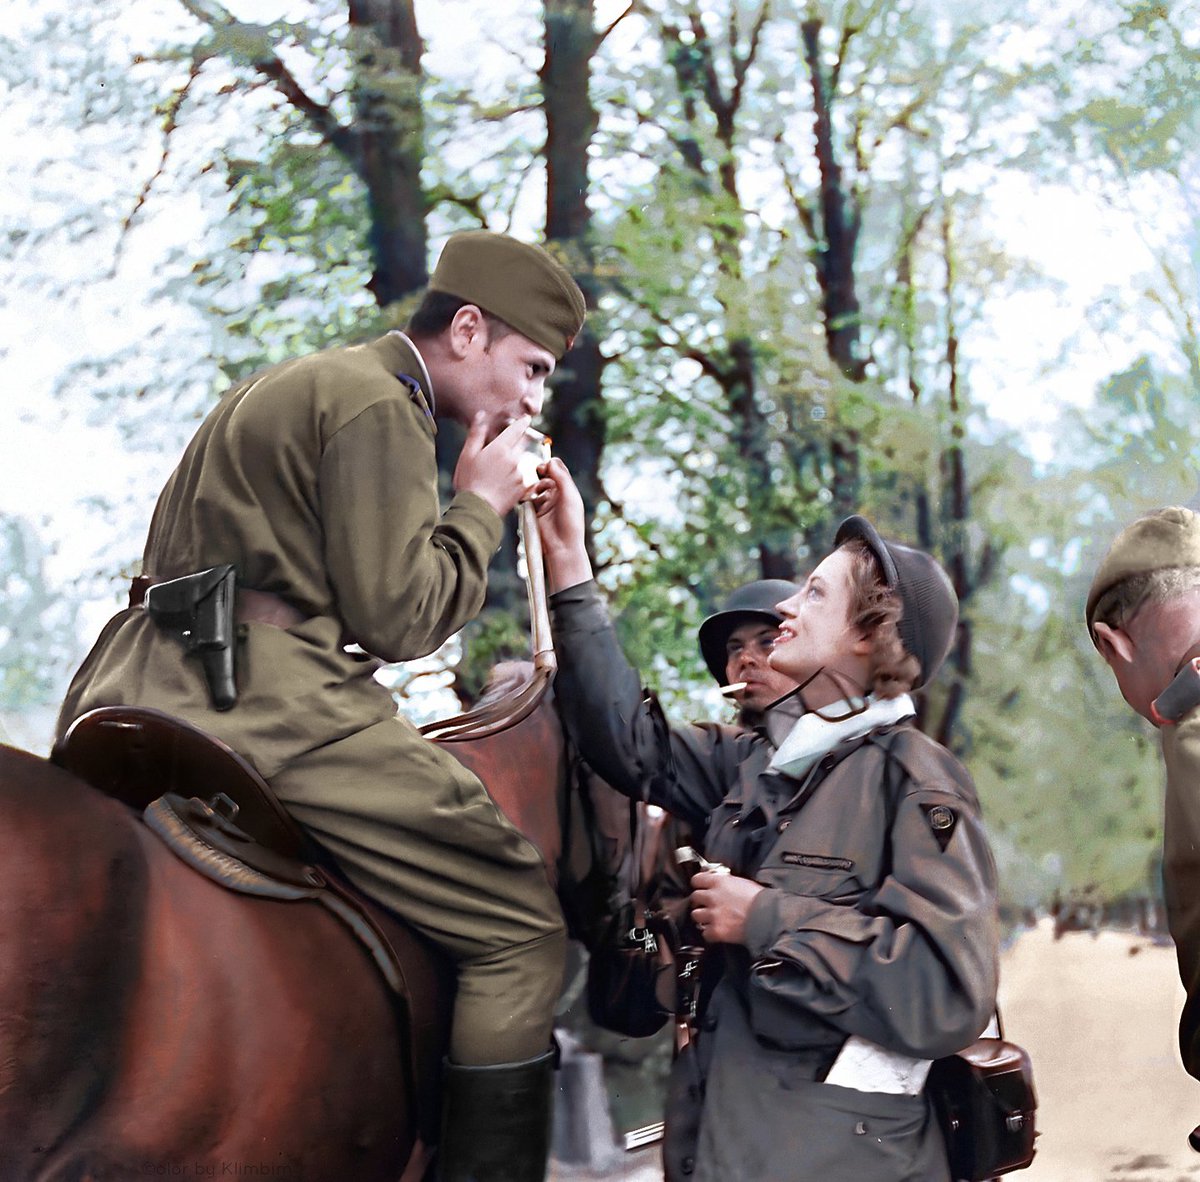 War Correspondent Lee Miller lights the cigarette of a Red Army Cavalryman after the link-up between US and Soviet forces near Torgau Germany - April 1945